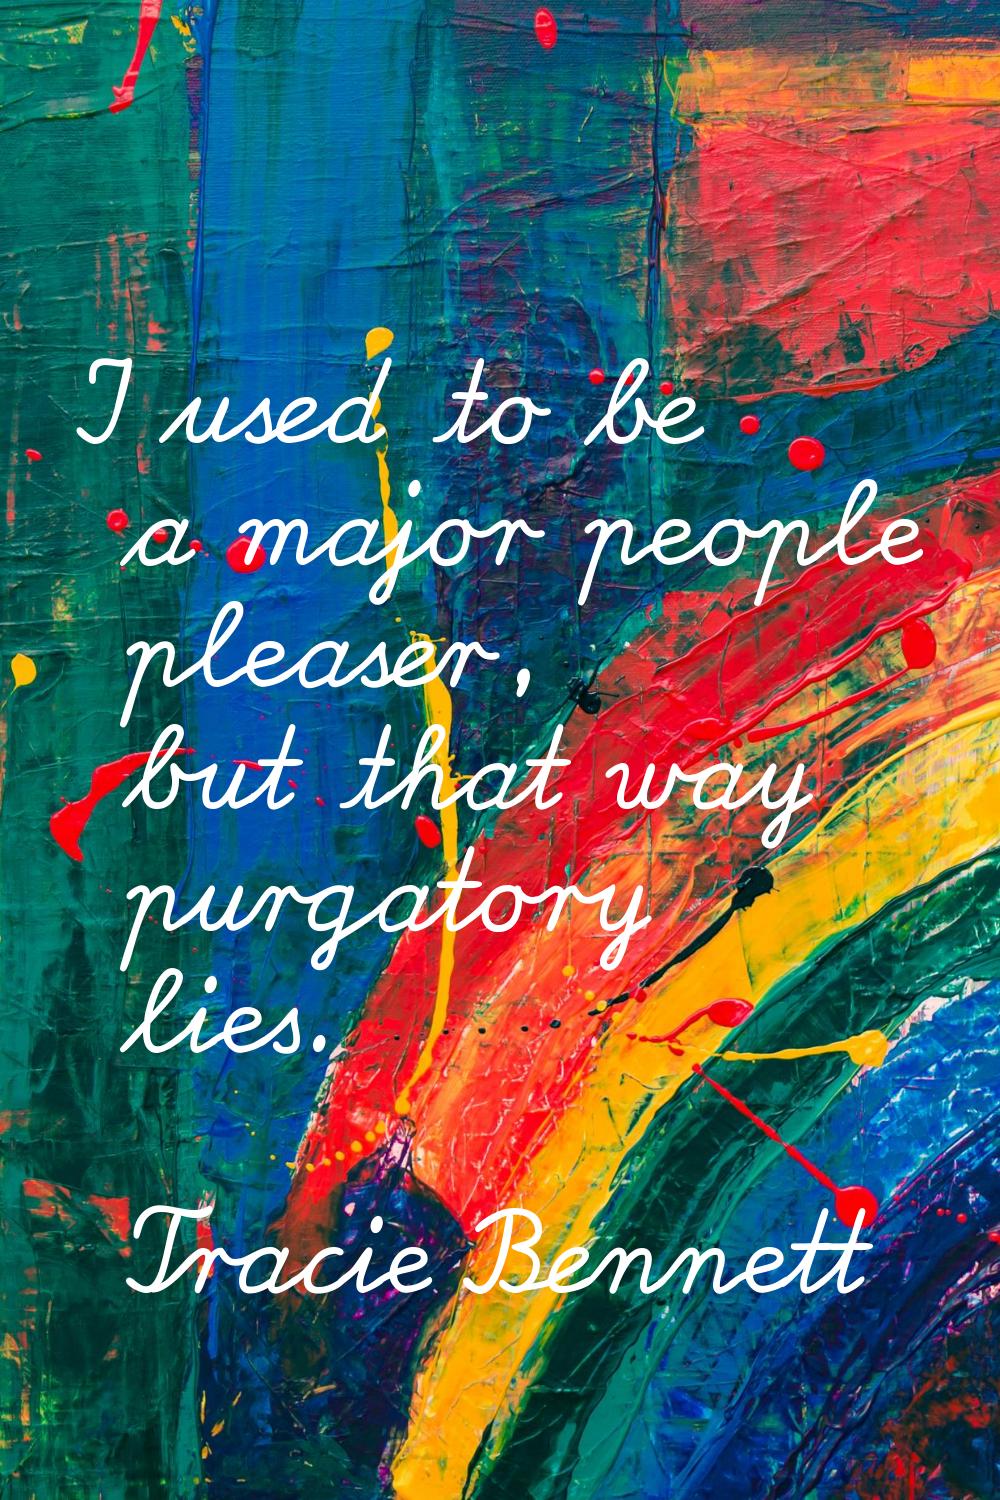 I used to be a major people pleaser, but that way purgatory lies.